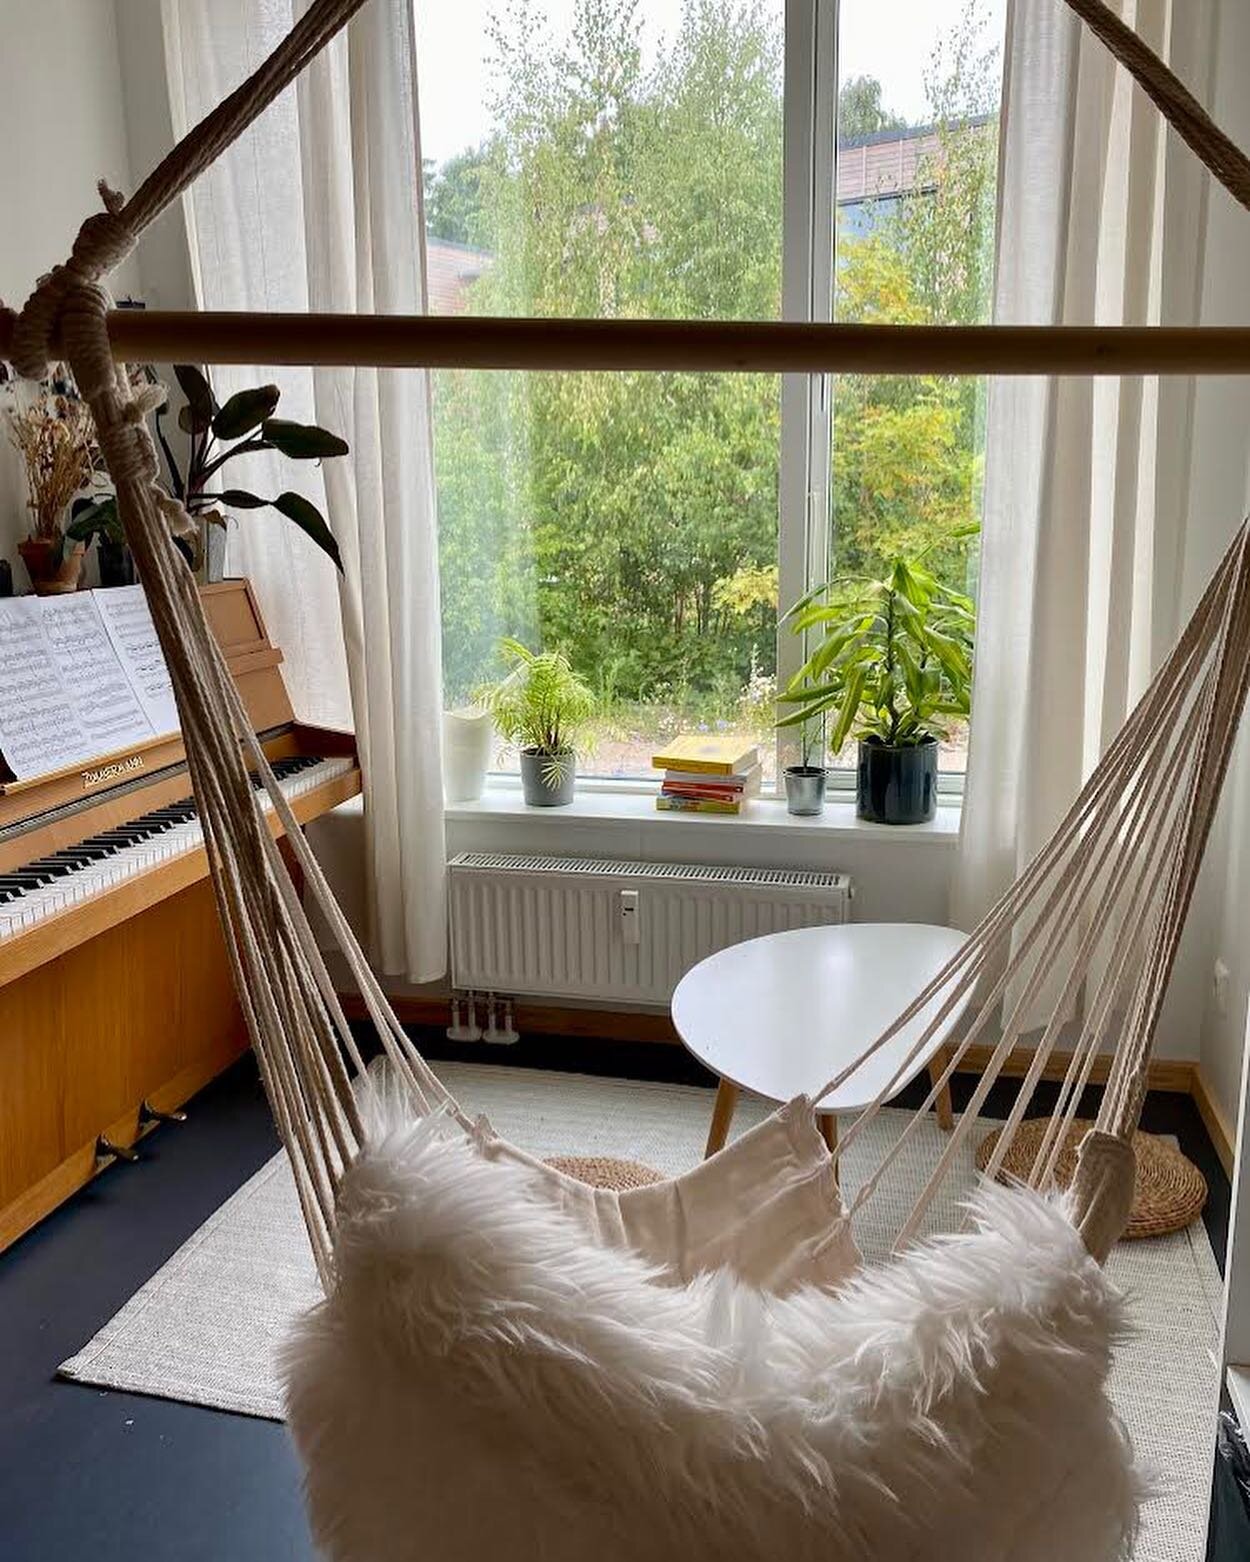 A sneak peek from Suzy&rsquo;s apartment in @cphvillage Vesterbro 👀✨🌱
Bunk bed, piano and hammock chair. We love it 🫶

Thanks for sharing!